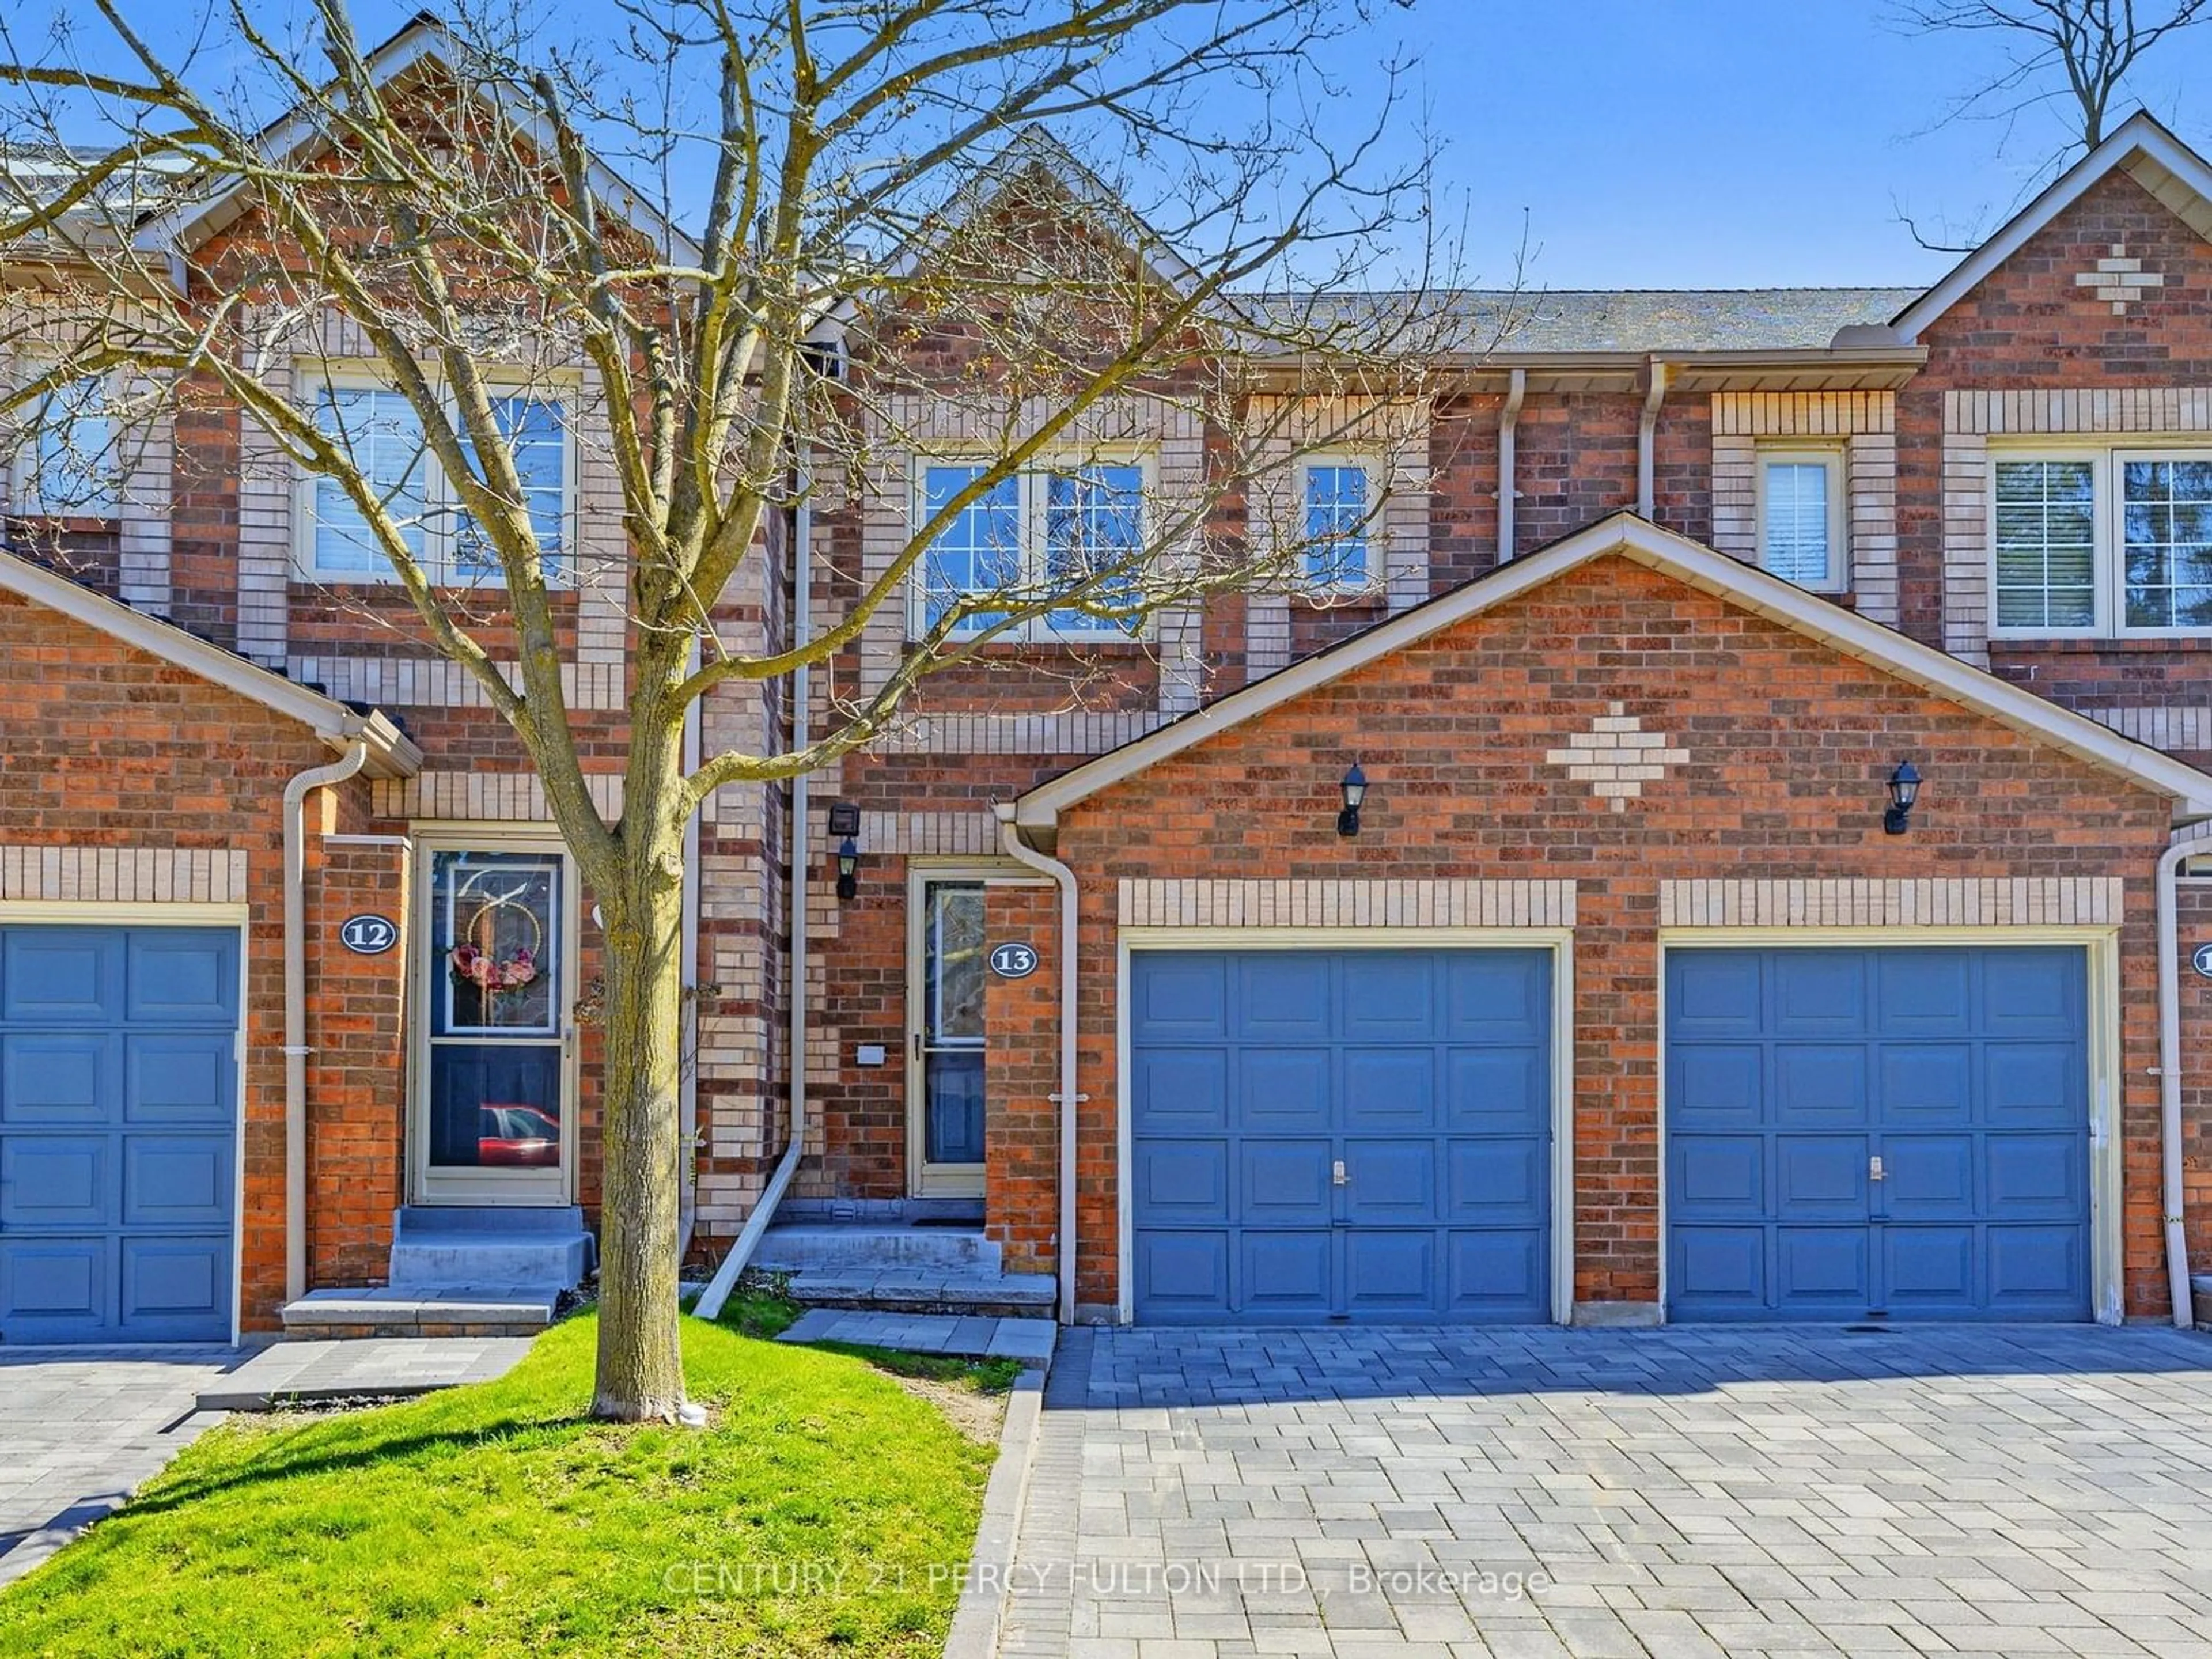 Home with brick exterior material for 6157 Kingston Rd #13, Toronto Ontario M1C 4Z3